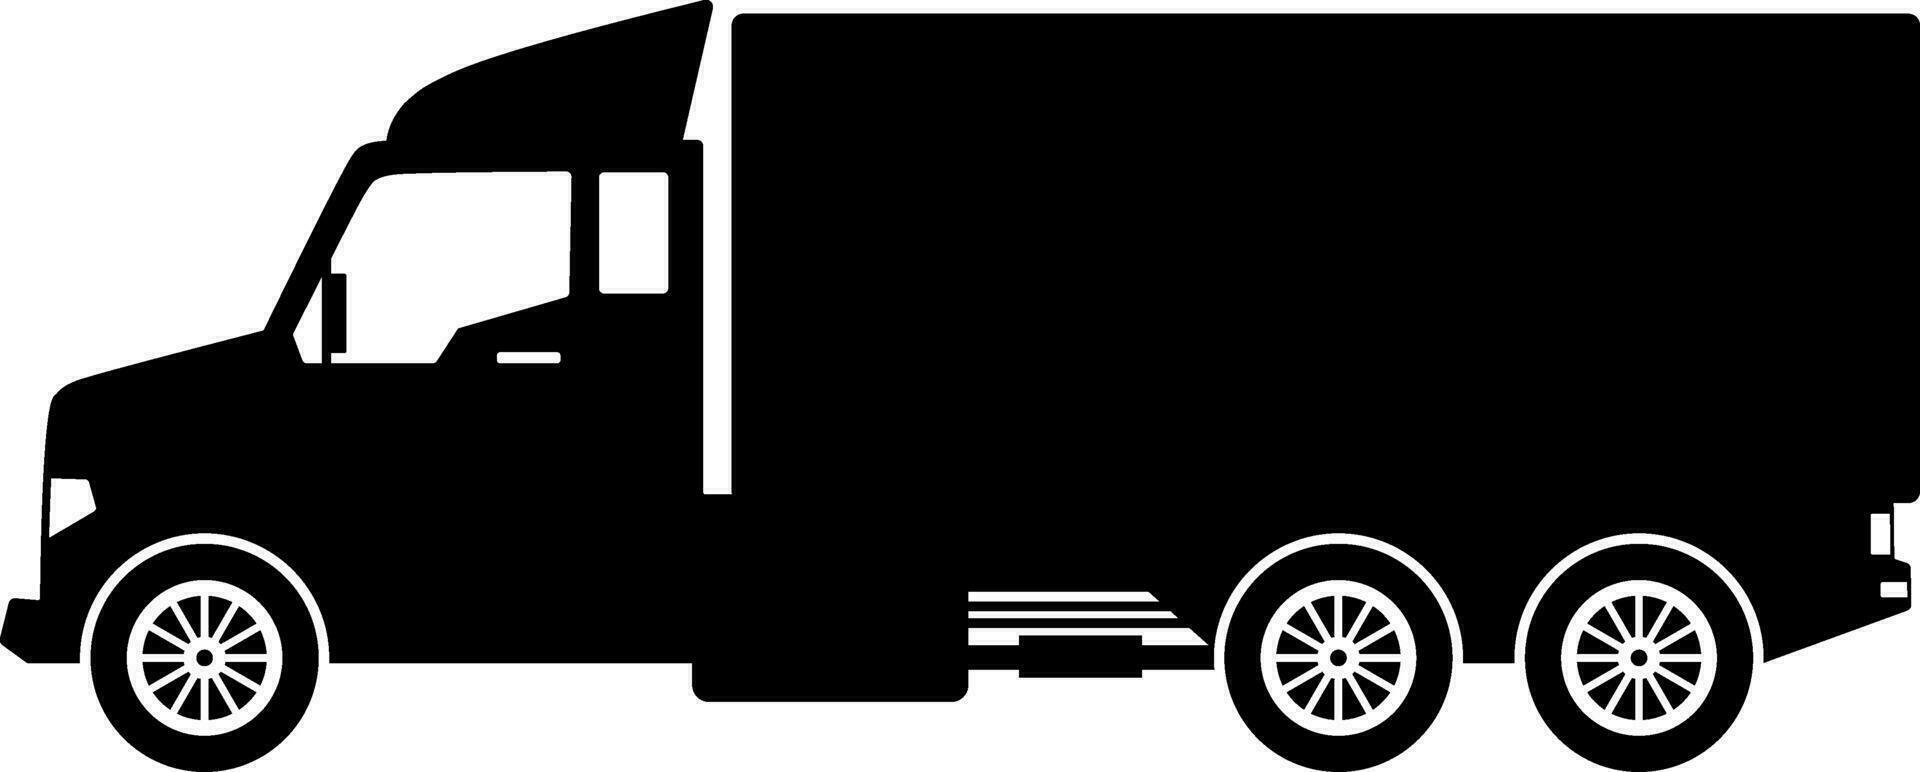 Box truck icon vector. Shipment truck silhouette for icon, symbol and sign. Box truck for shipment, transit, delivery, package or transportation vector